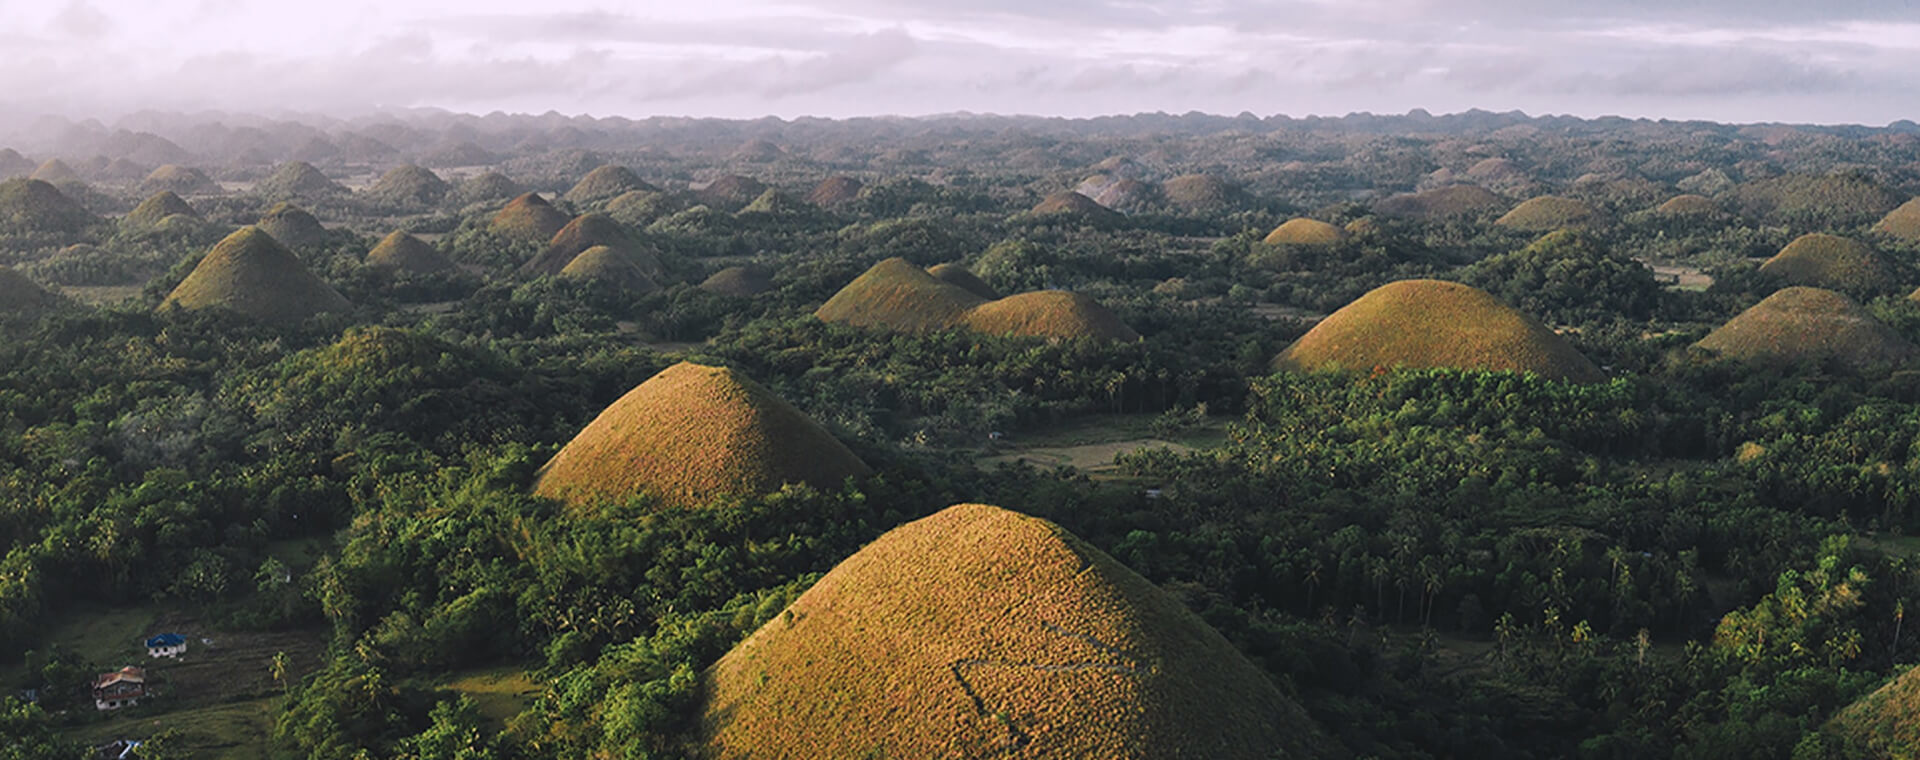 An aerial view of the chocolate hills in philippines.